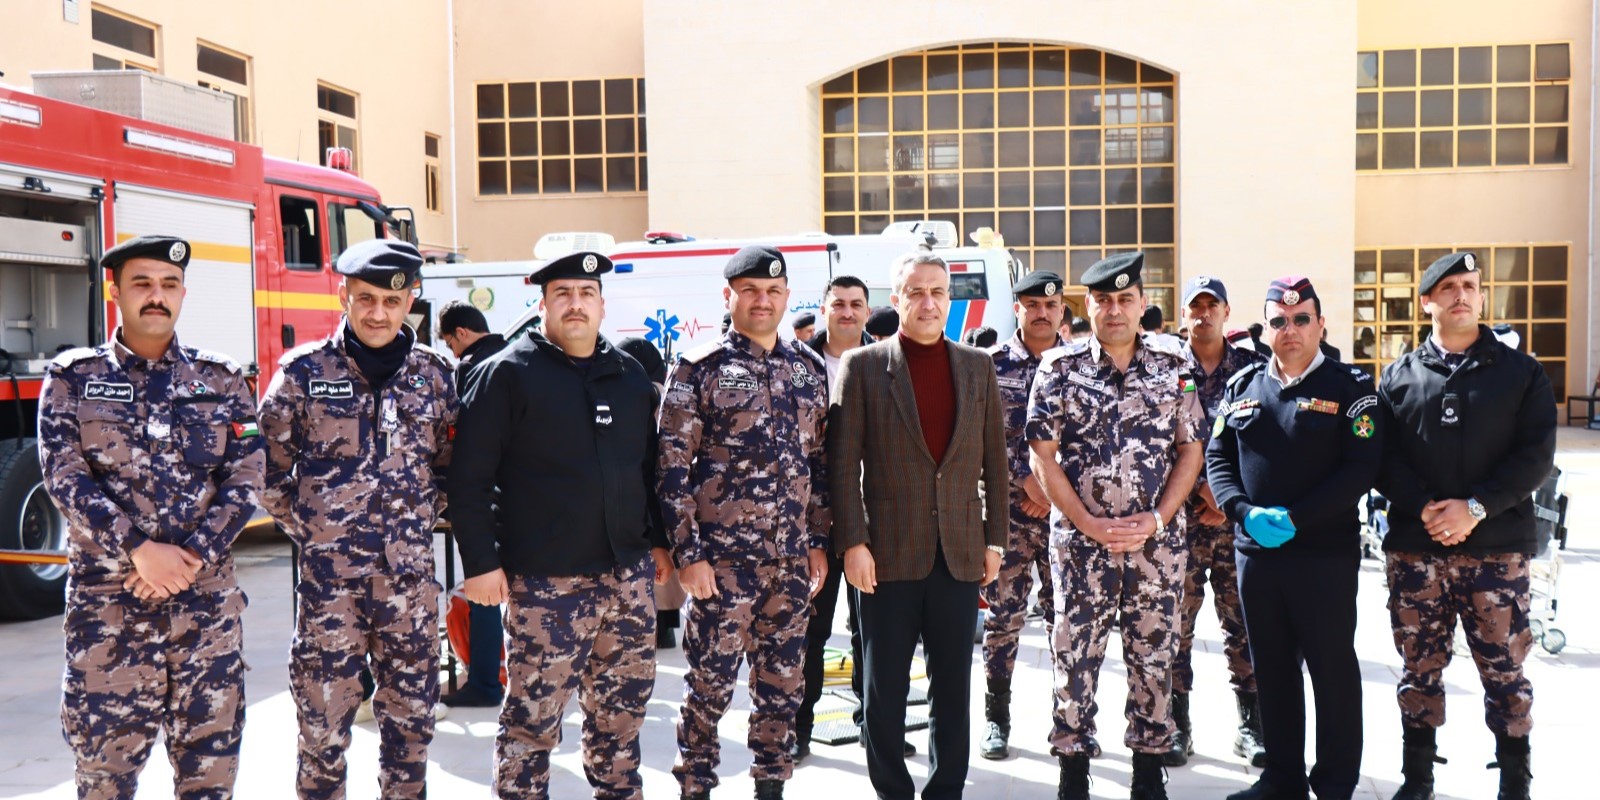 An exhibition at Al Hussein Bin Talal University on the occasion of World Civil Defense Day